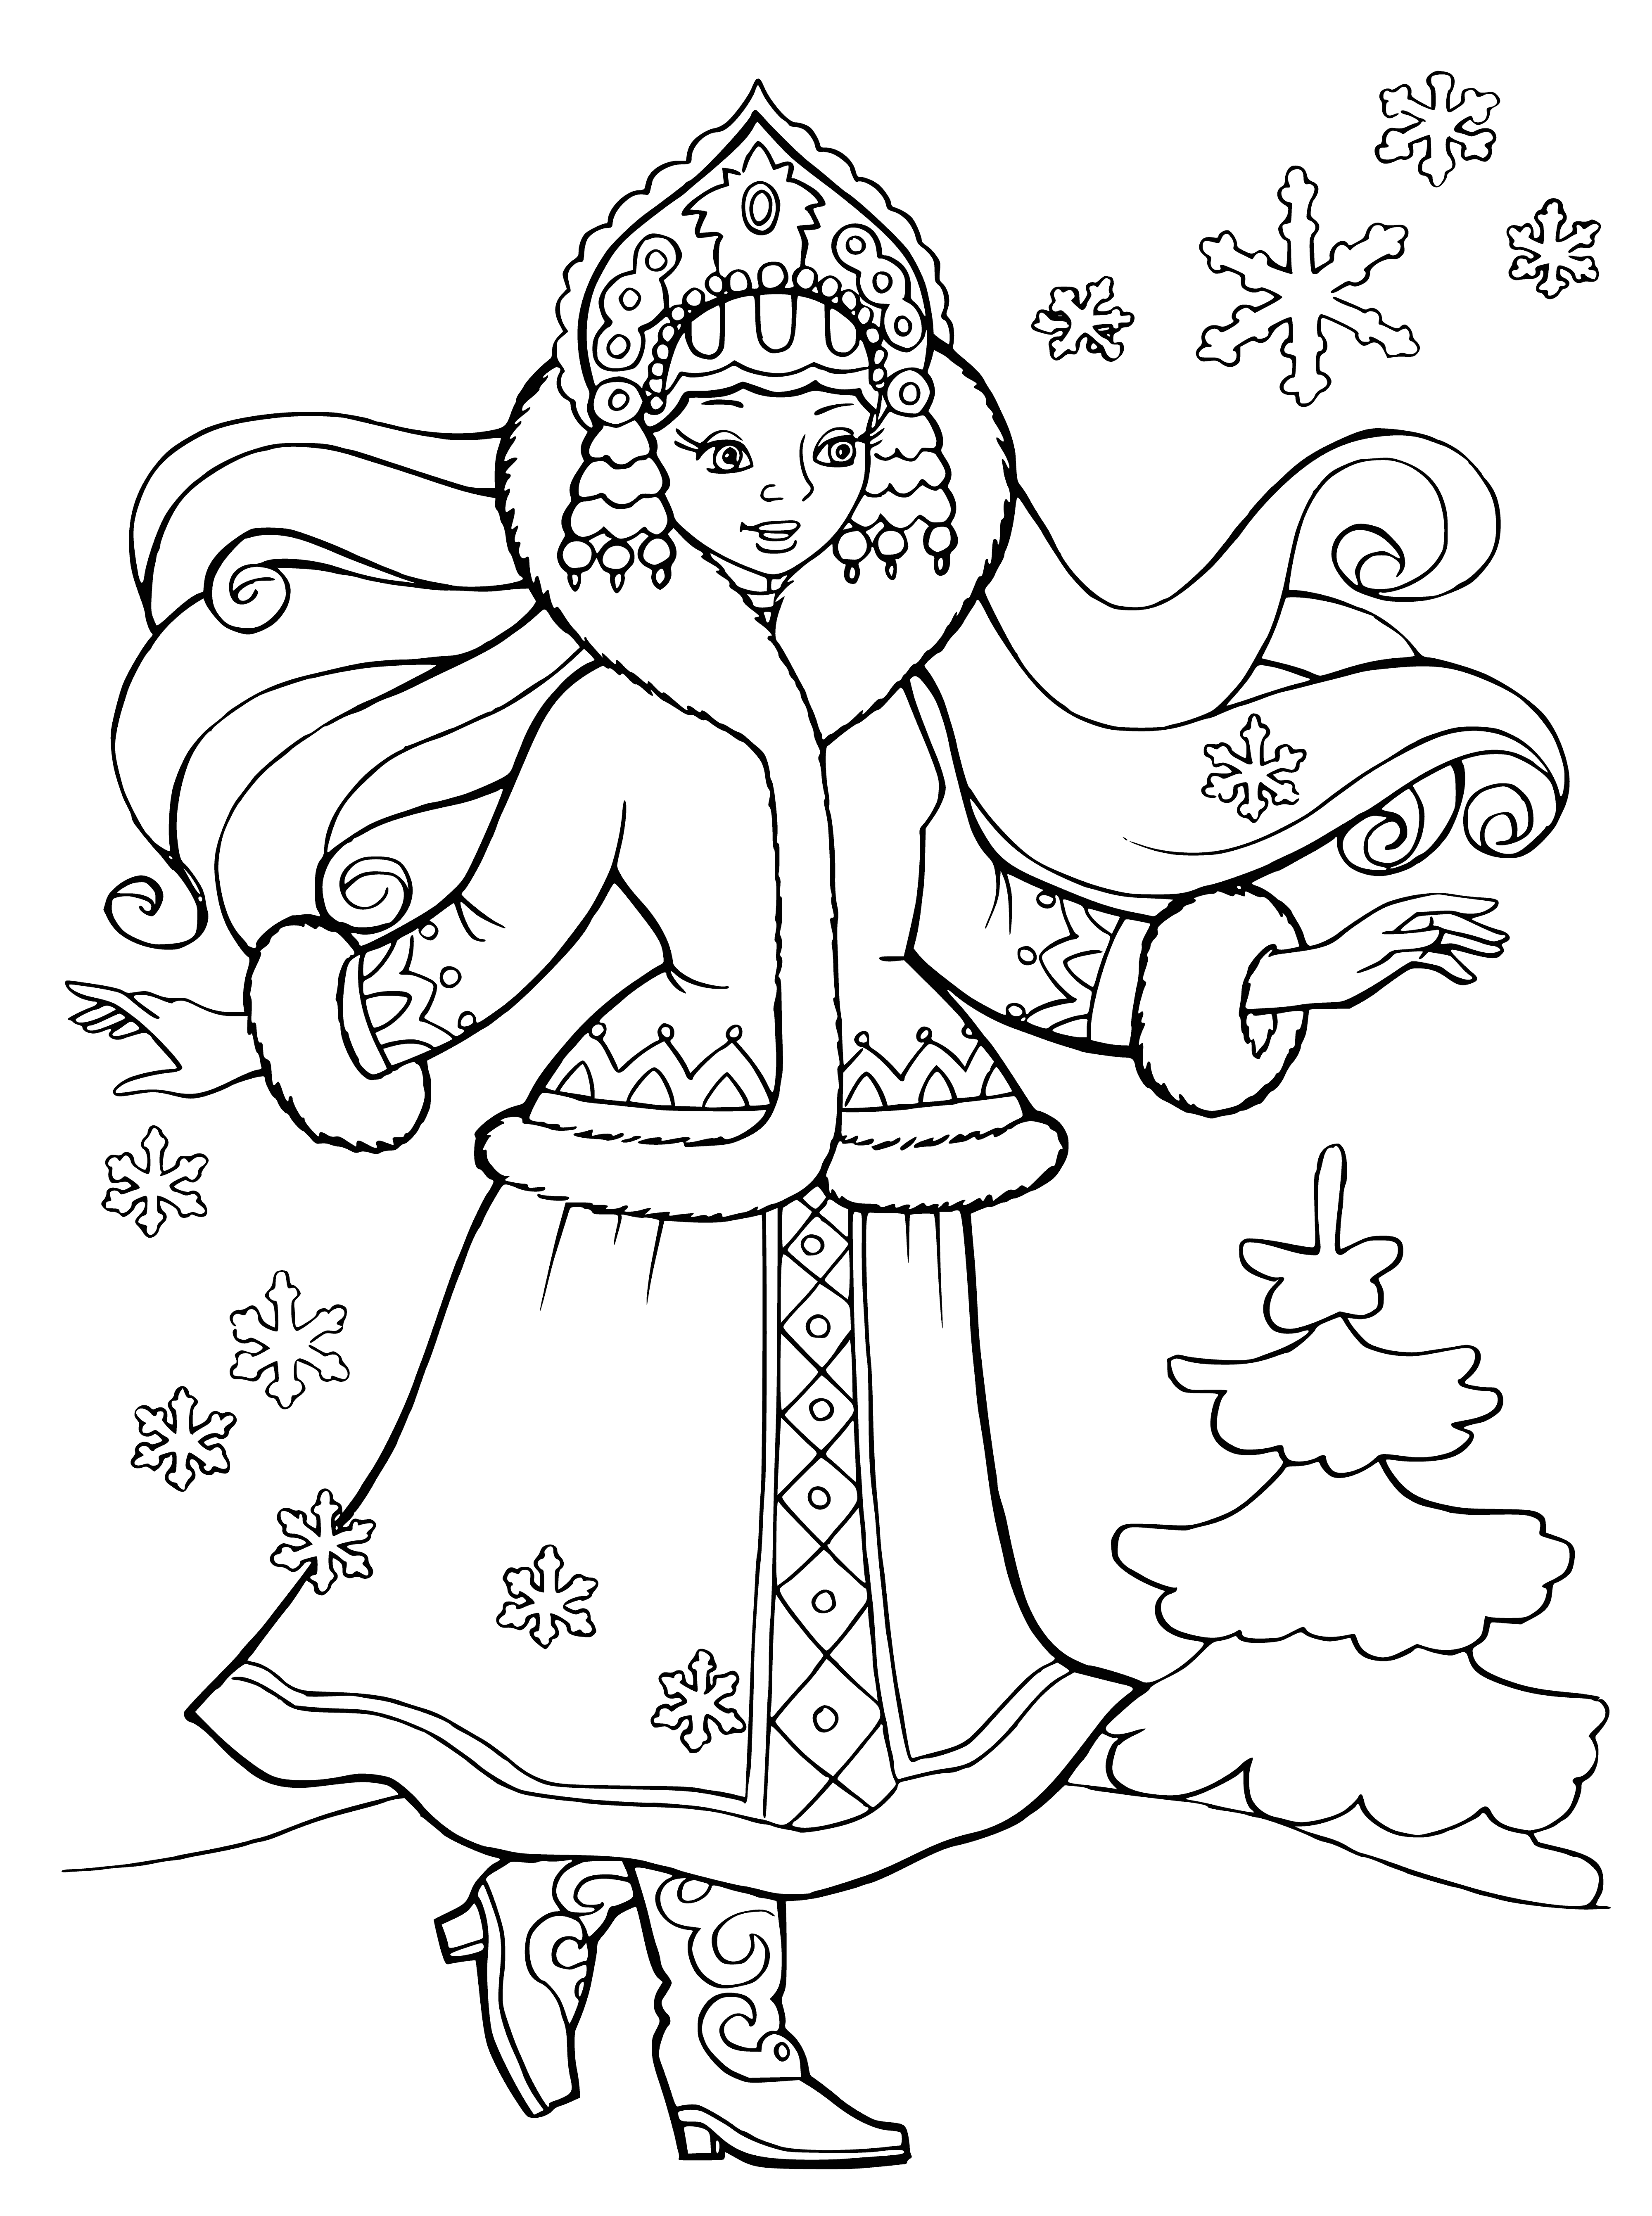 coloring page: Maiden w/ pale skin & blue eyes stands in front of winter scene: snow & trees. White scarf & snowflakes in her hair.